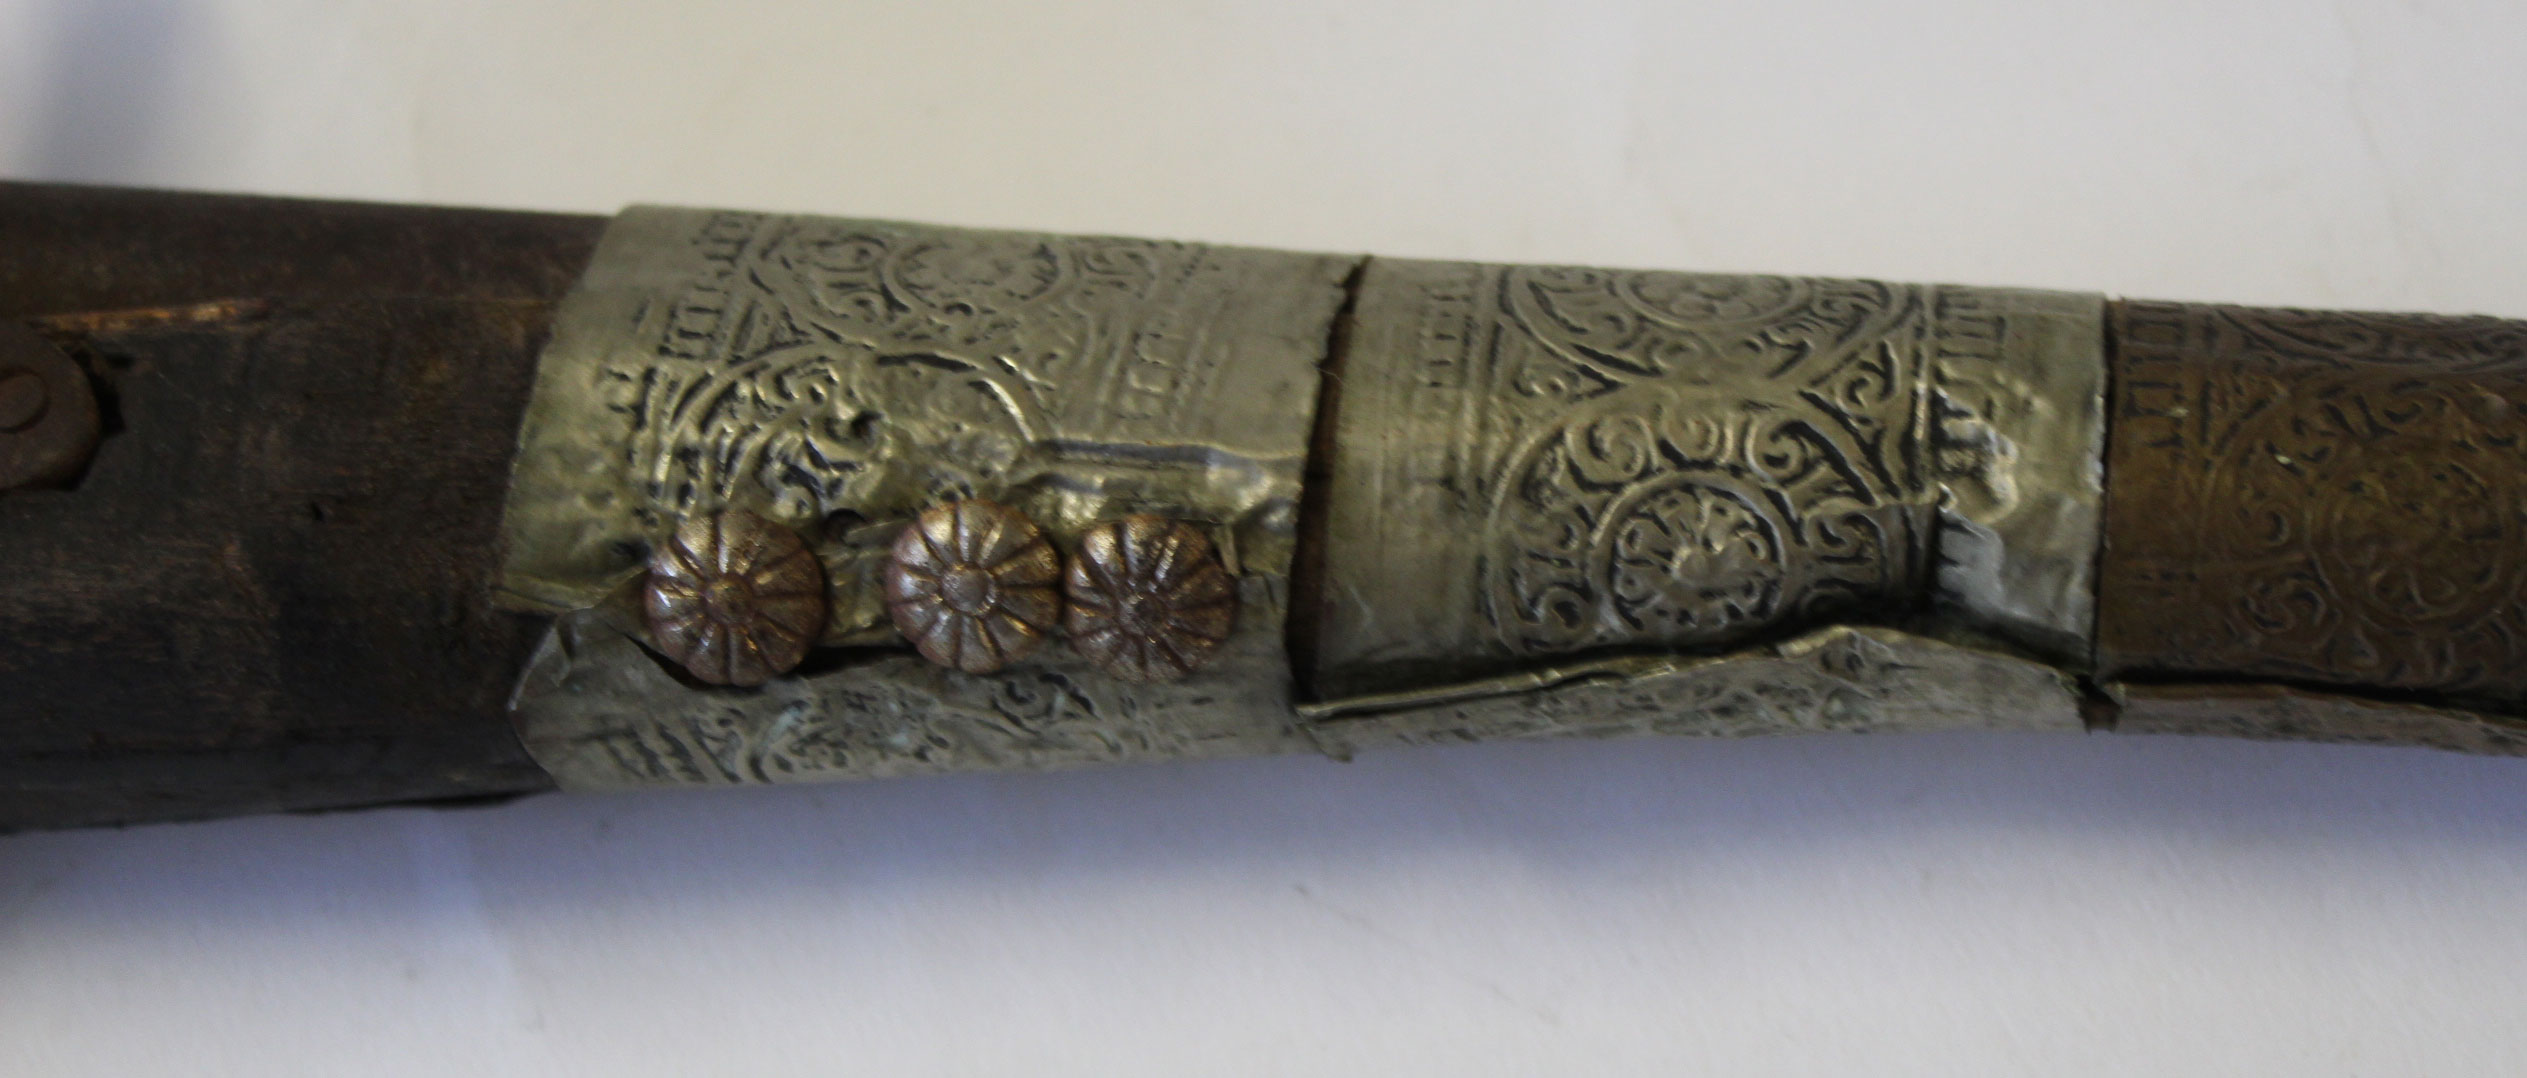 19th century decorative Far Eastern or Indian pistol, the barrel bound with impressed brass, - Image 3 of 4